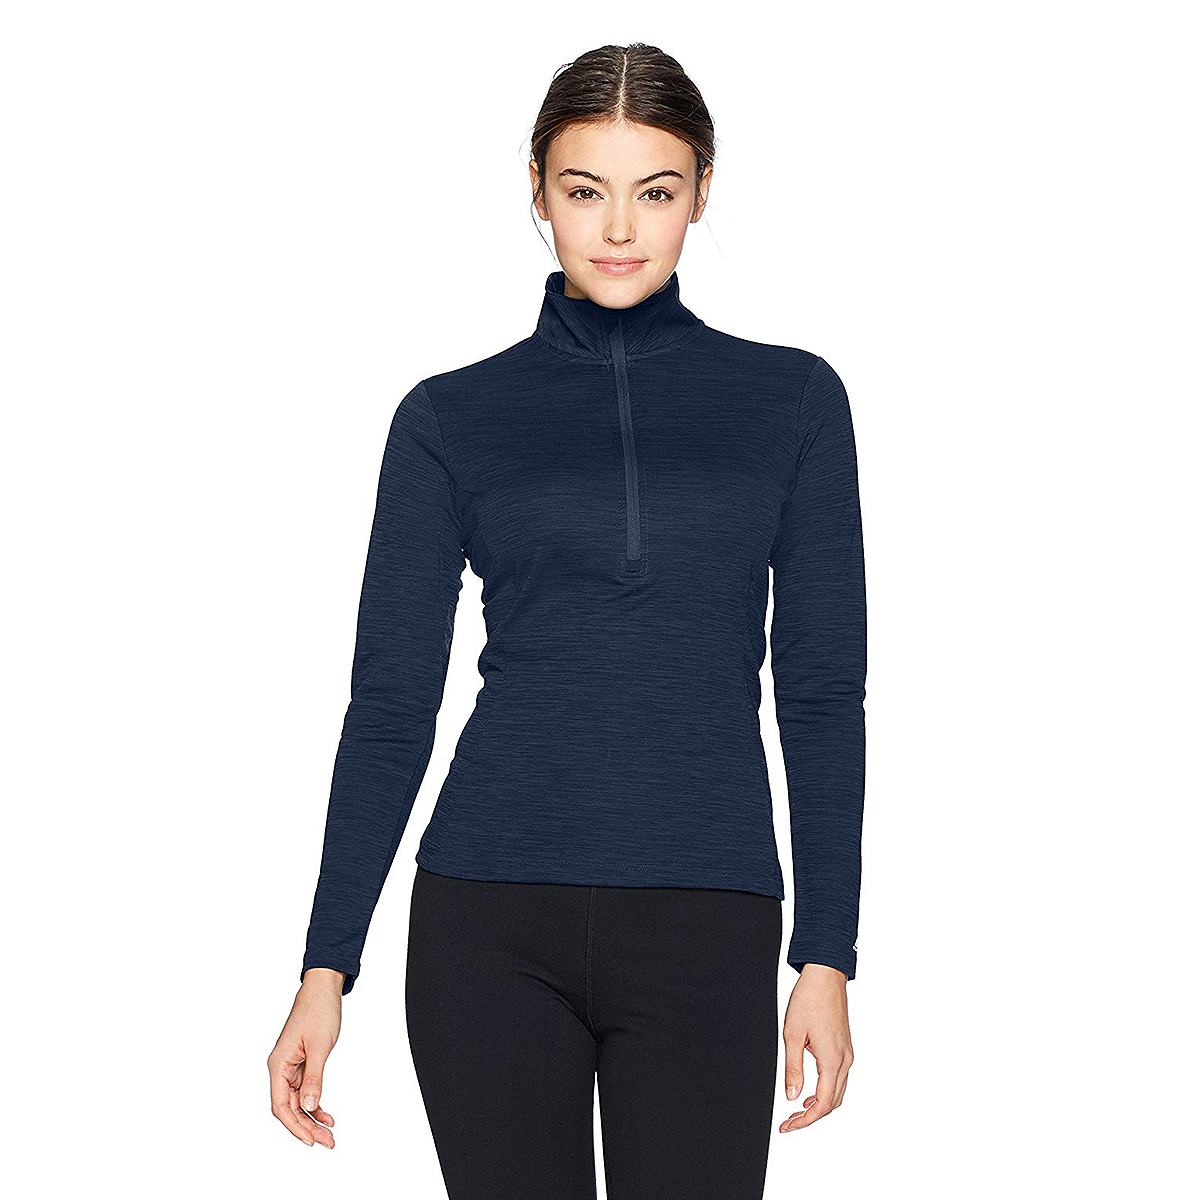 This Sporty, Stretchy Pullover Proves That Activewear Can Be Chic Too - Us Weekly